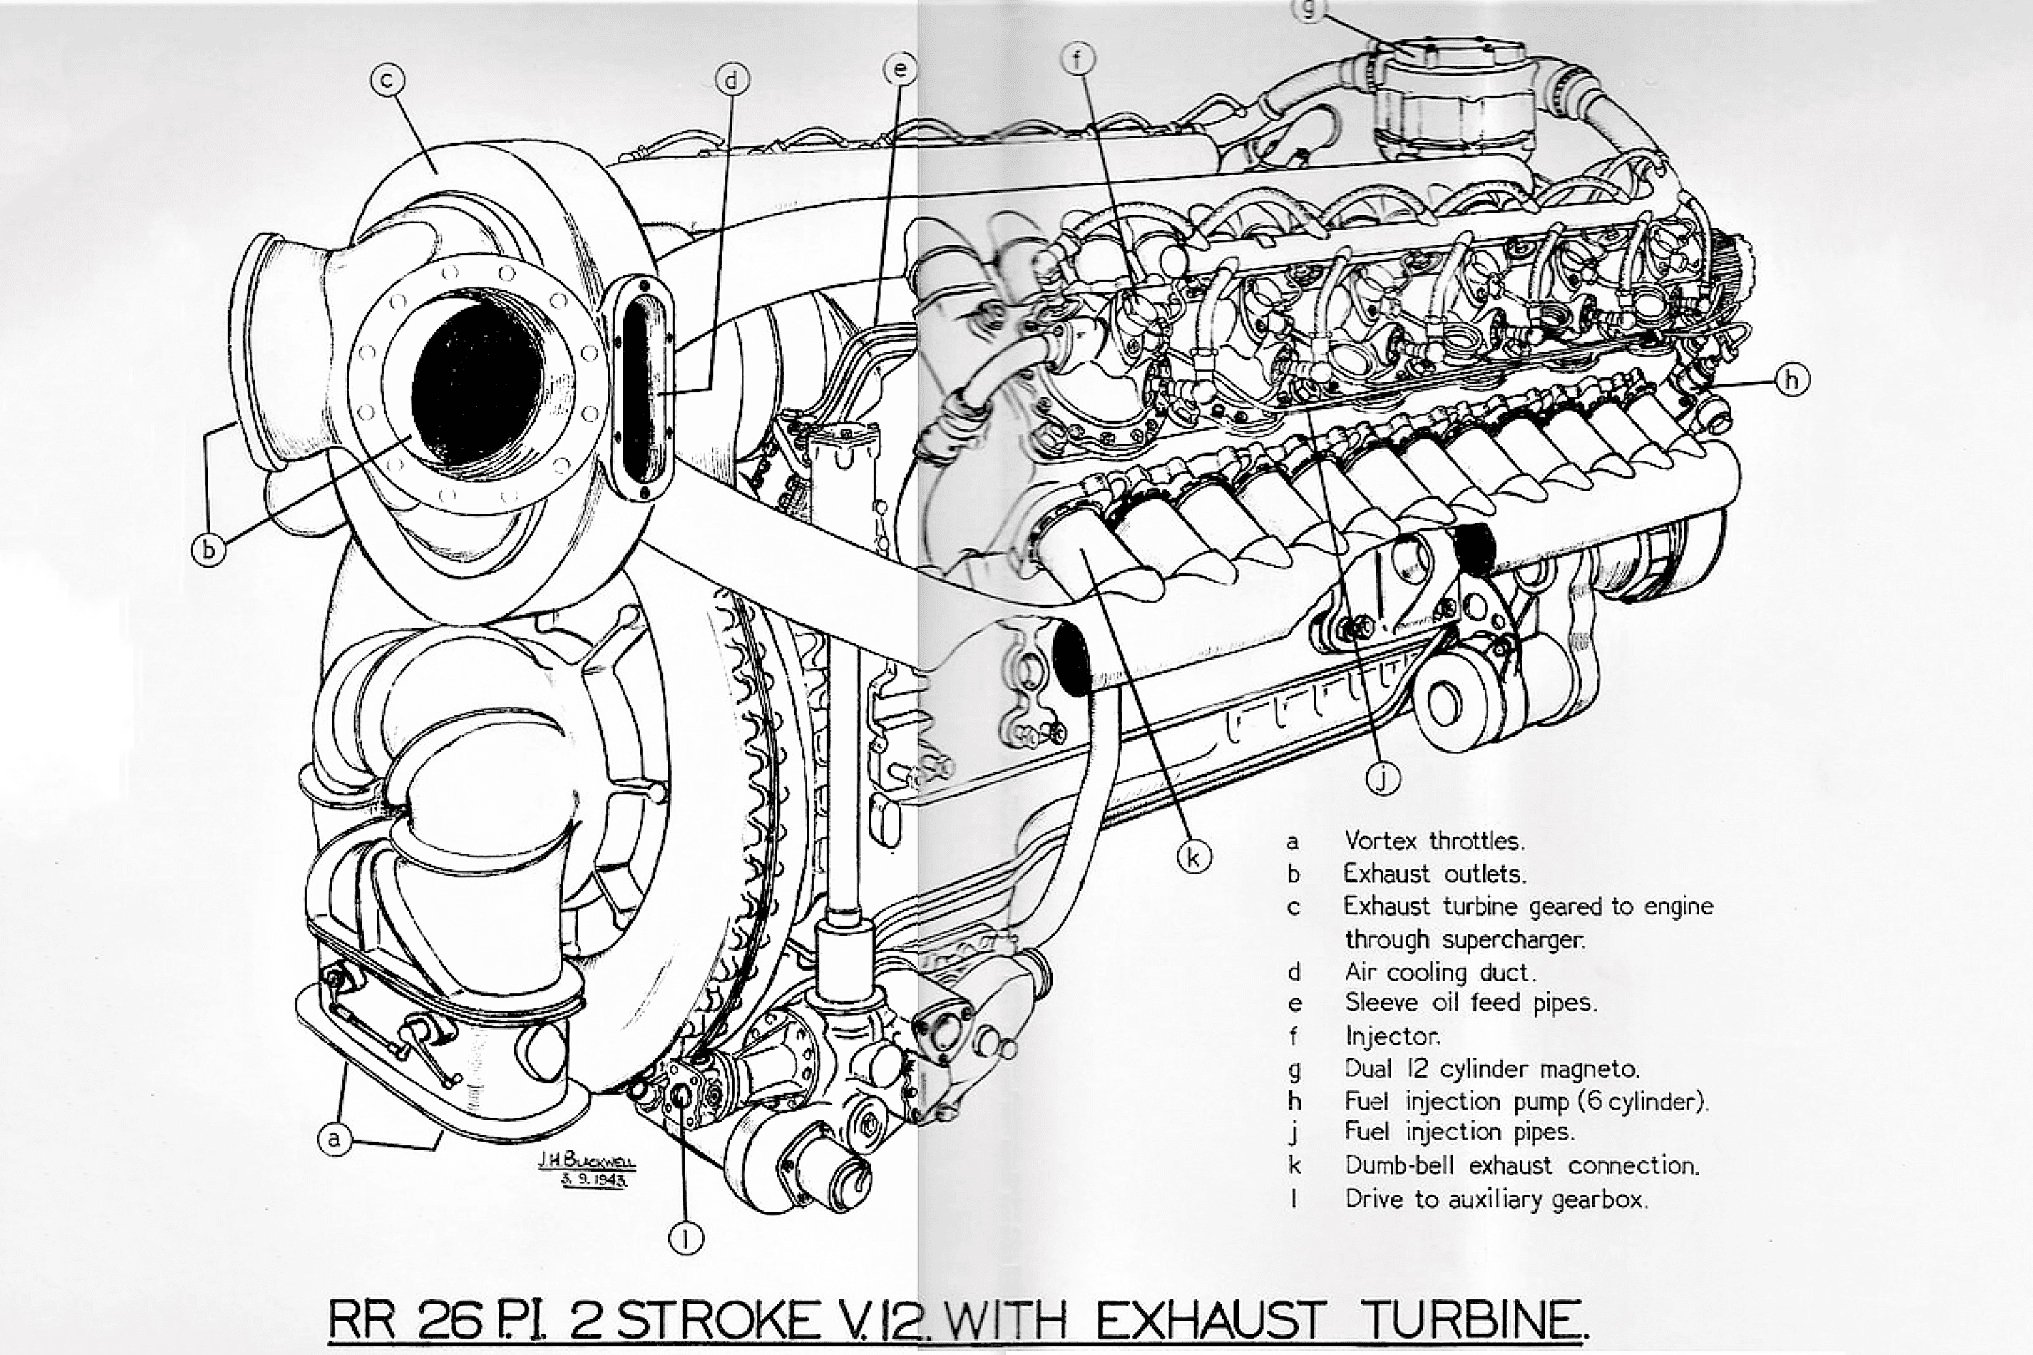 The Amazing Aero Engine That Never Flew: The V12 Rolls Royce Crecy